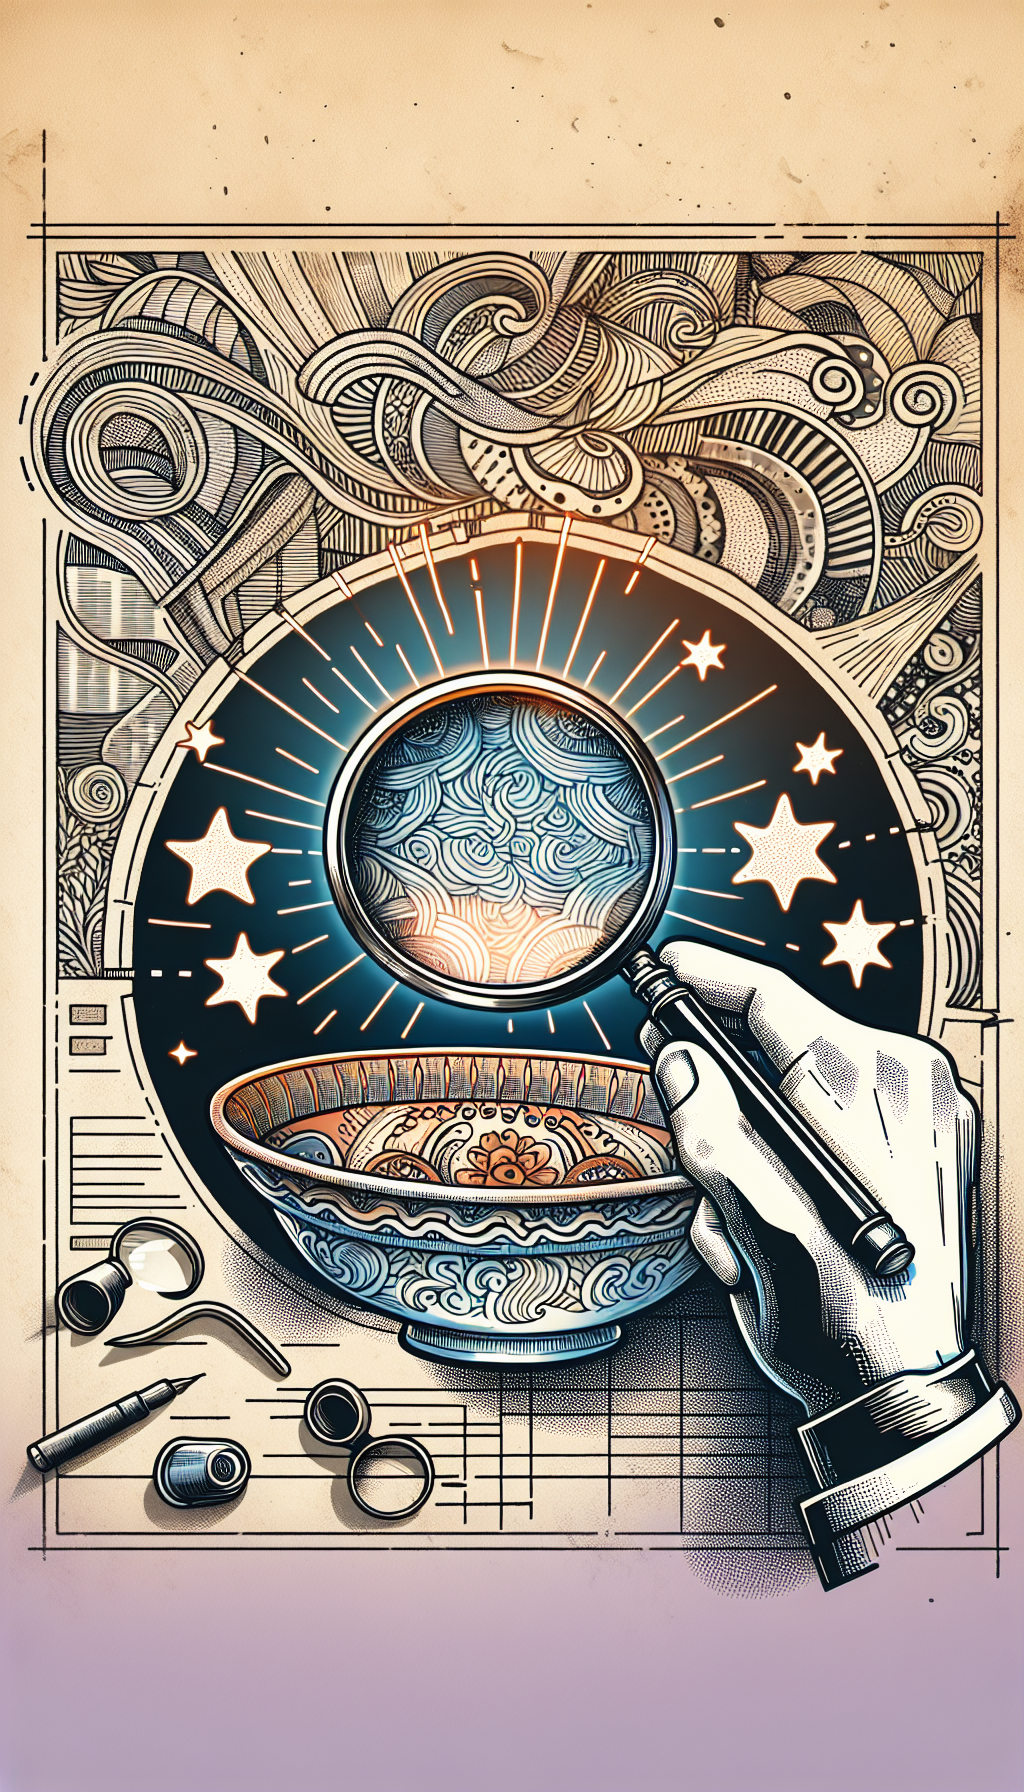 An illustration featuring an antique magnifying glass hovering over a vibrant CorningWare dish, with translucent pattern lines and rarity stars beaming upwards, reminiscent of a treasure map. The mix of hand-drawn doodles and digital elements creates a playful contrast, sparking a sense of discovery in identifying and assessing rare CorningWare patterns for collectors.